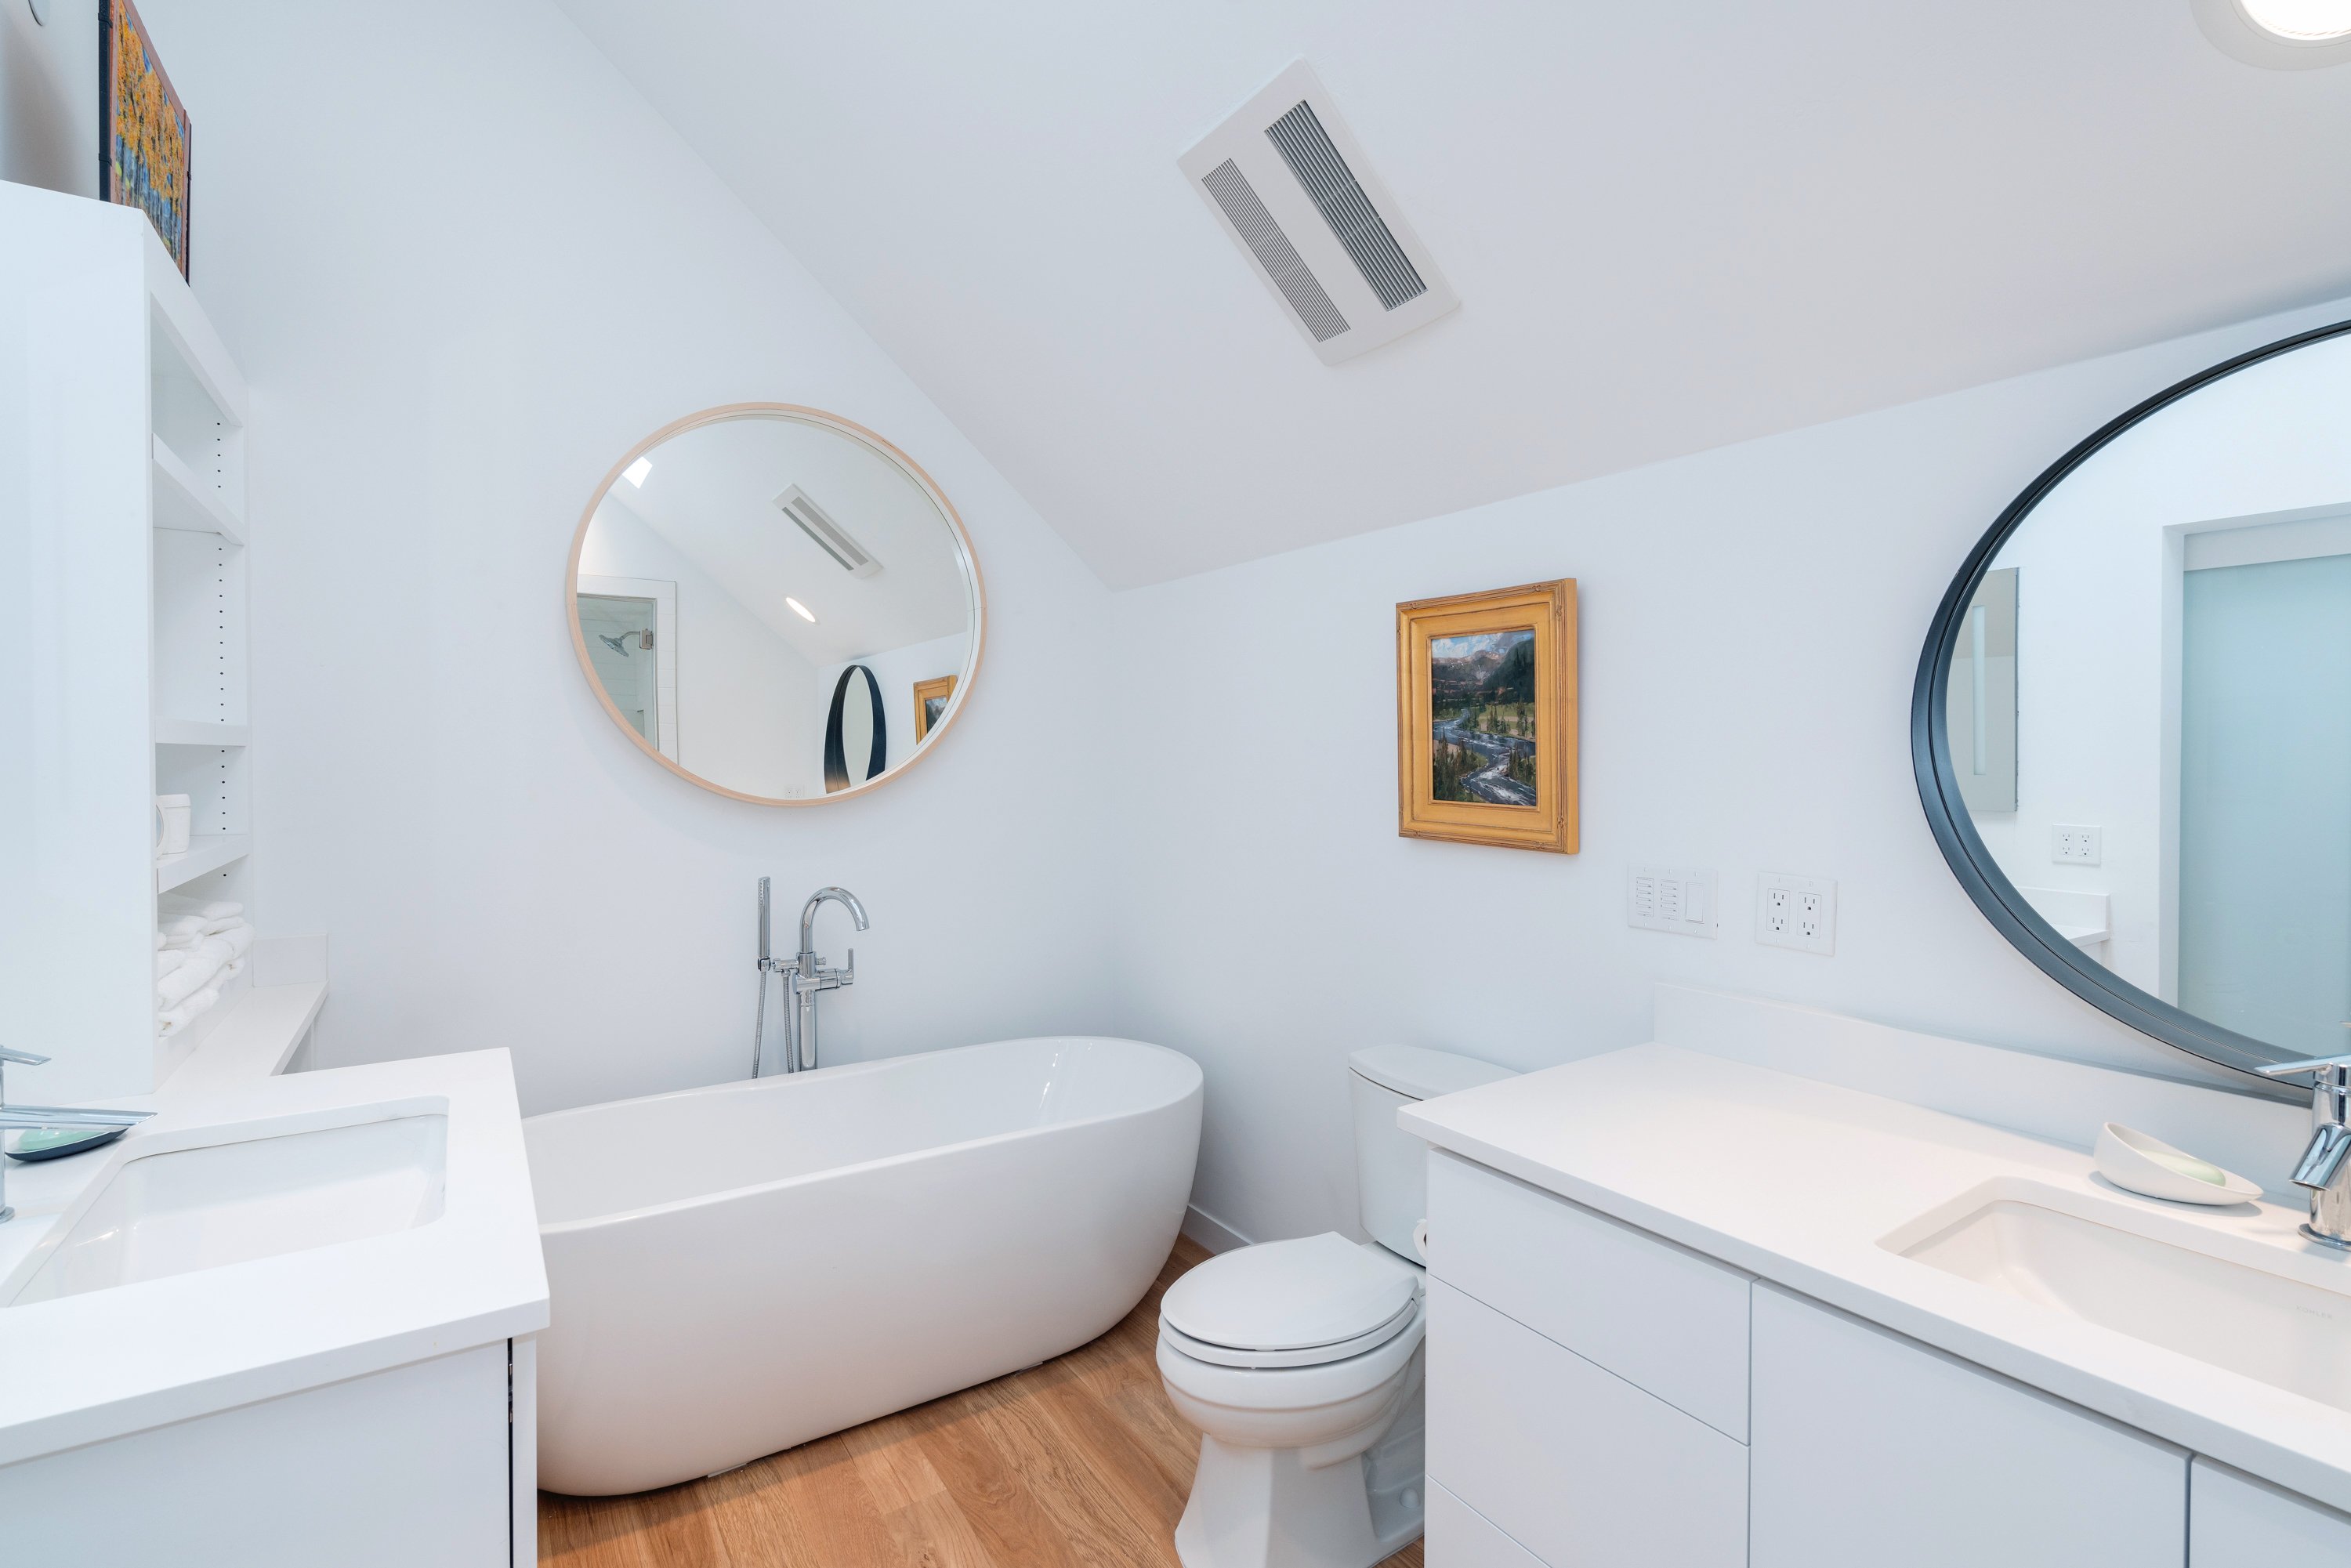 Bathroom with Soaking Tub and Vanity with Round Mirror